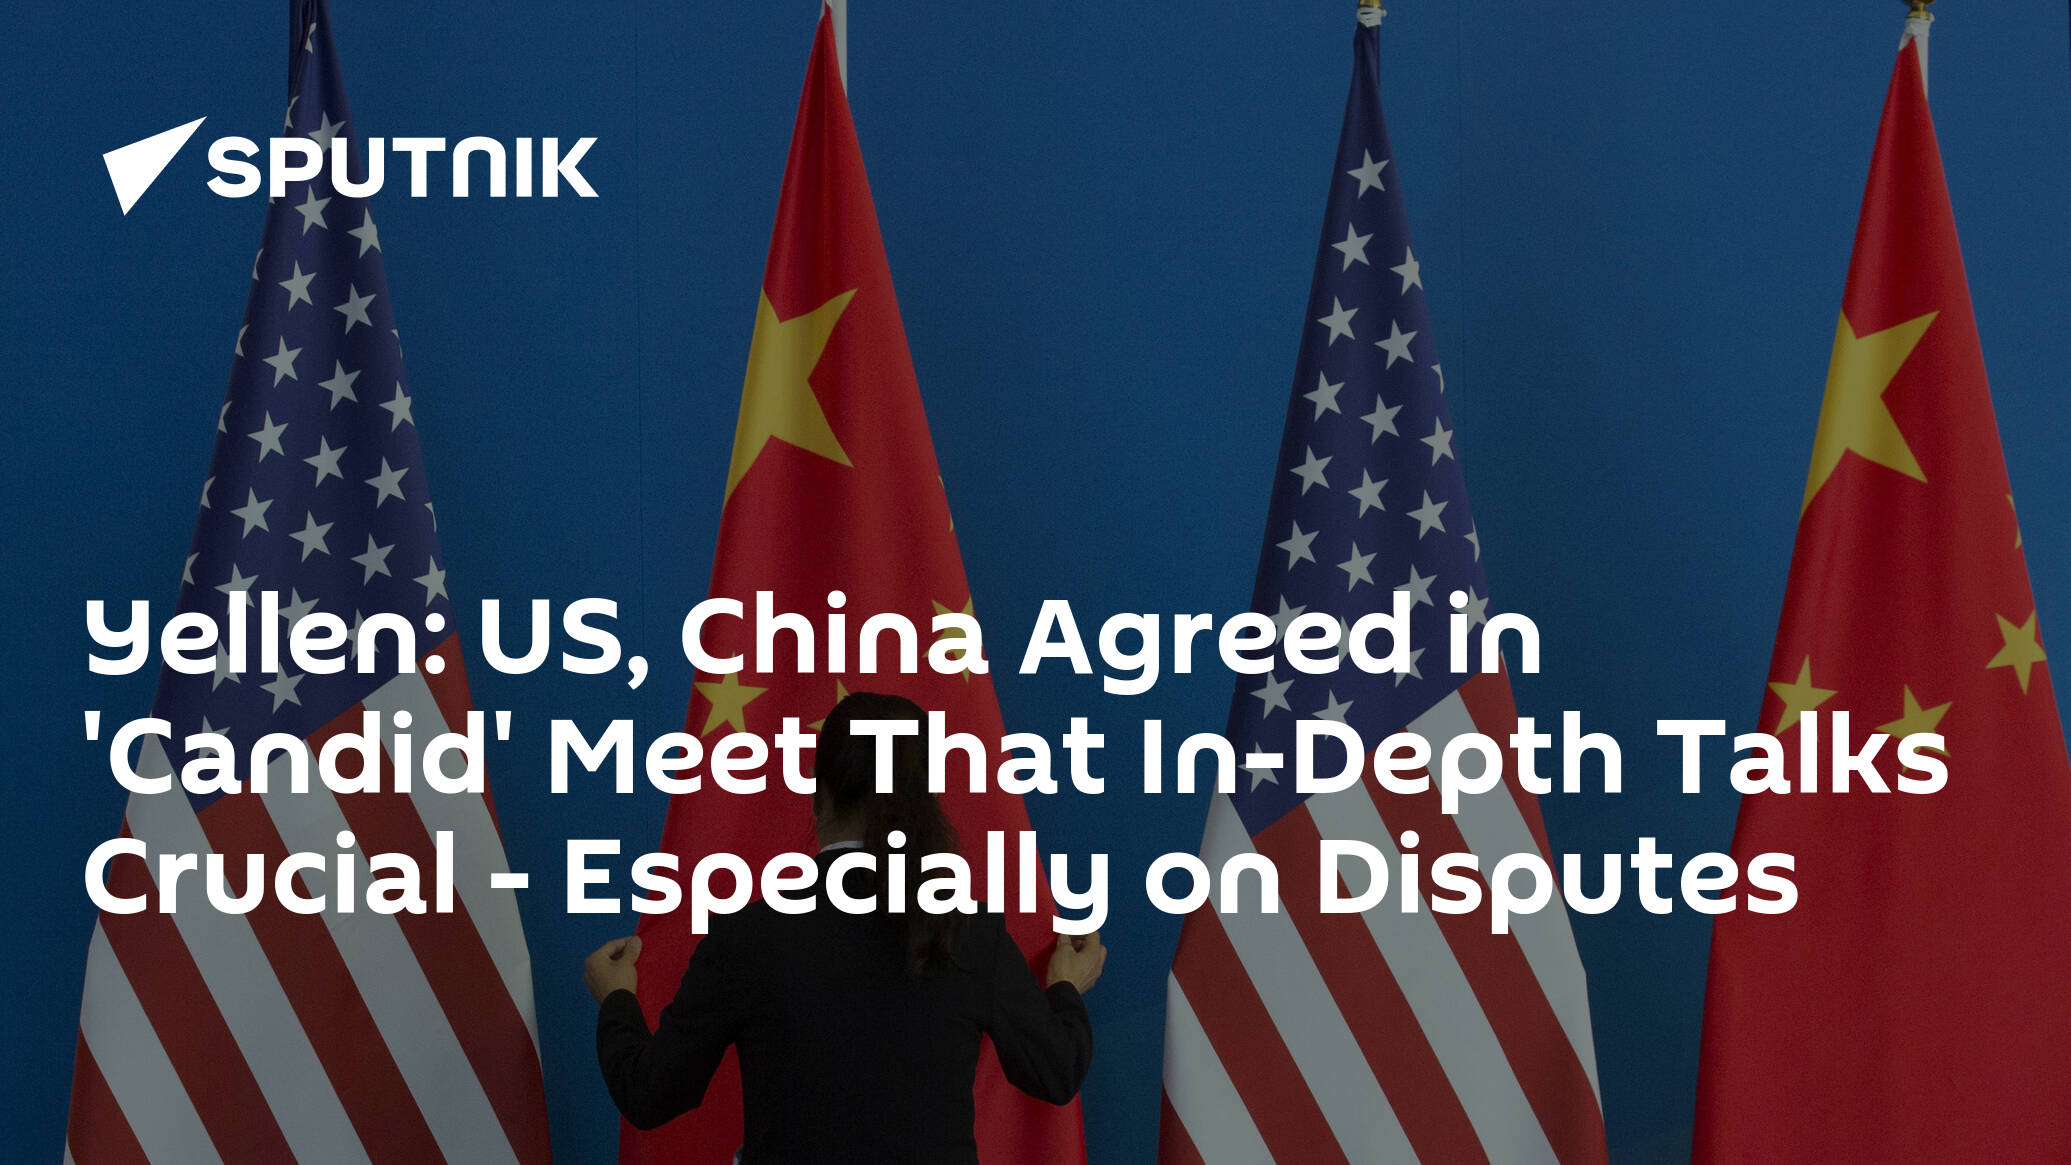 Yellen: US, China Agreed in 'Candid' Meet That In-Depth Talks Crucial – Especially on Disputes